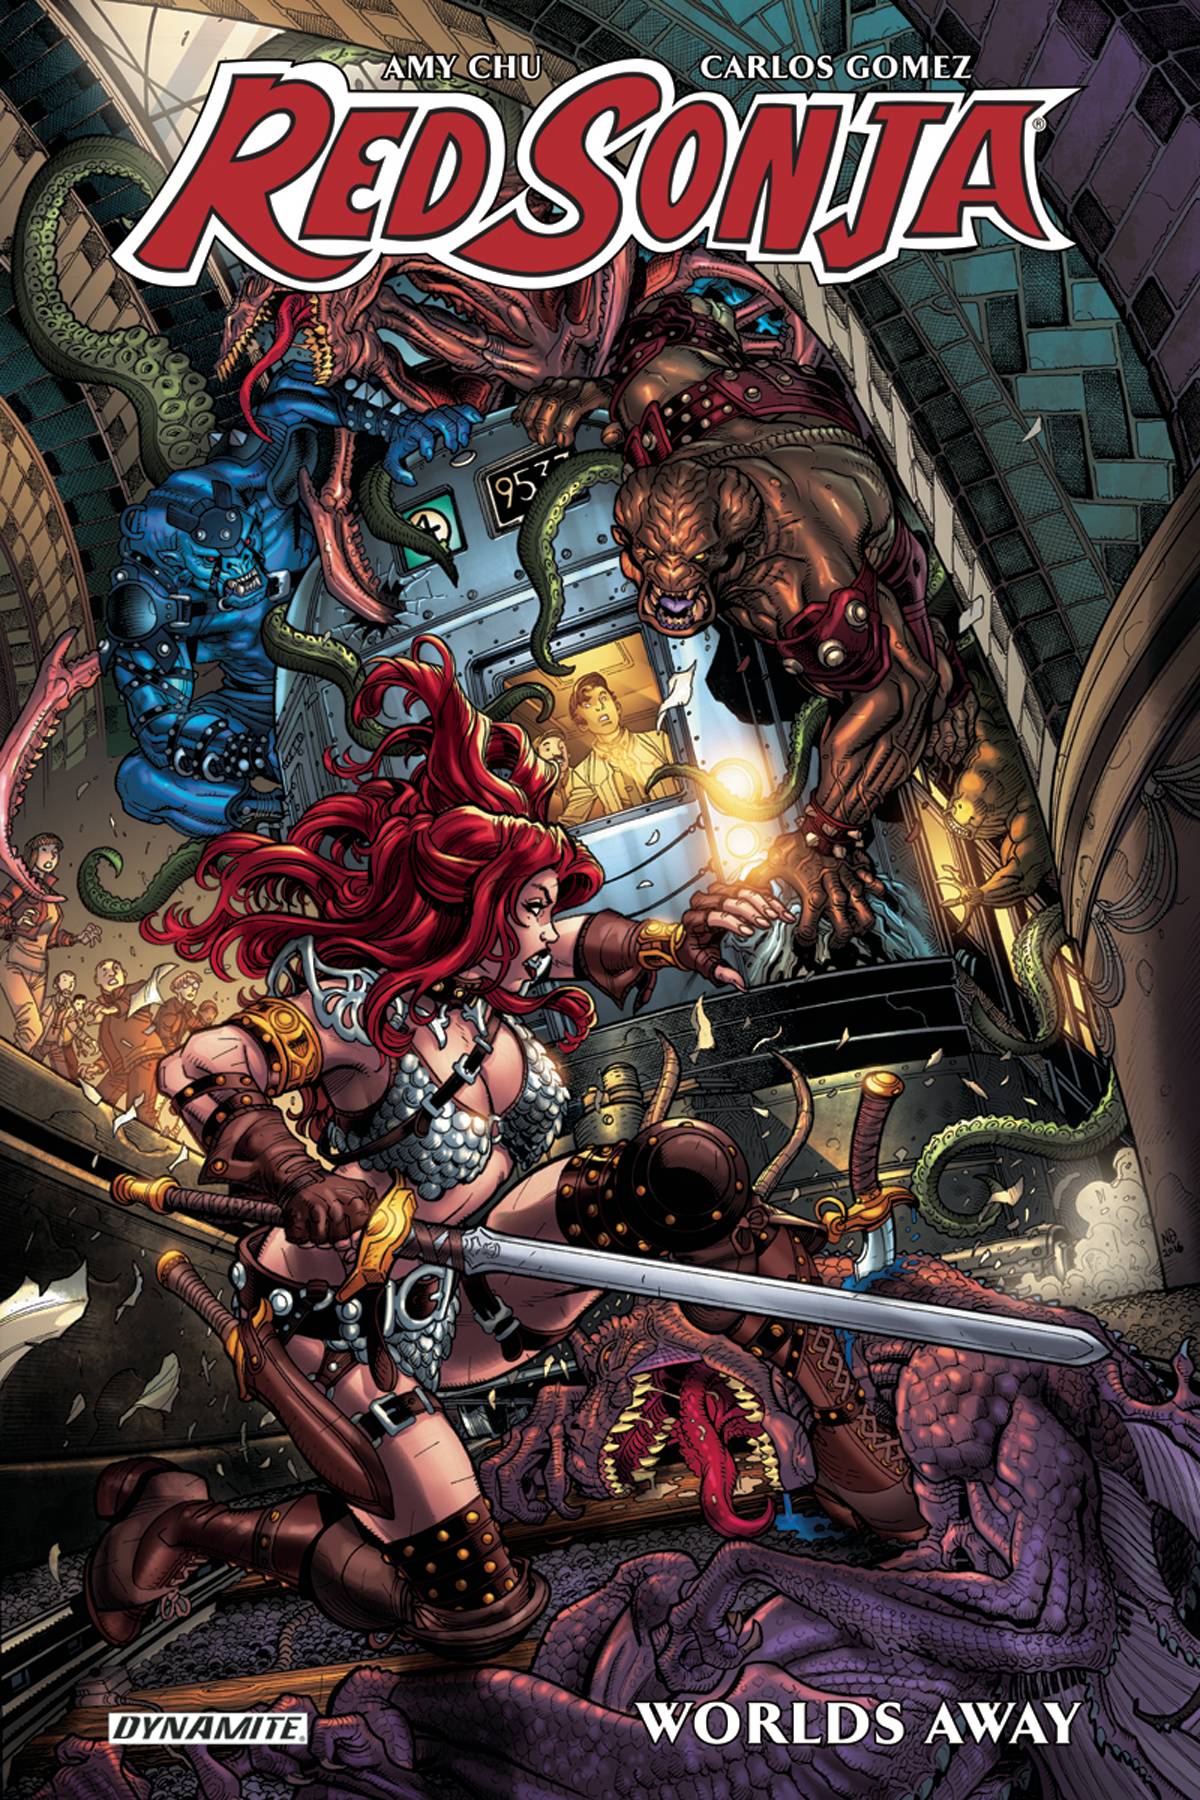 RED SONJA WORLDS AWAY TP VOL 01 (MAY171516)